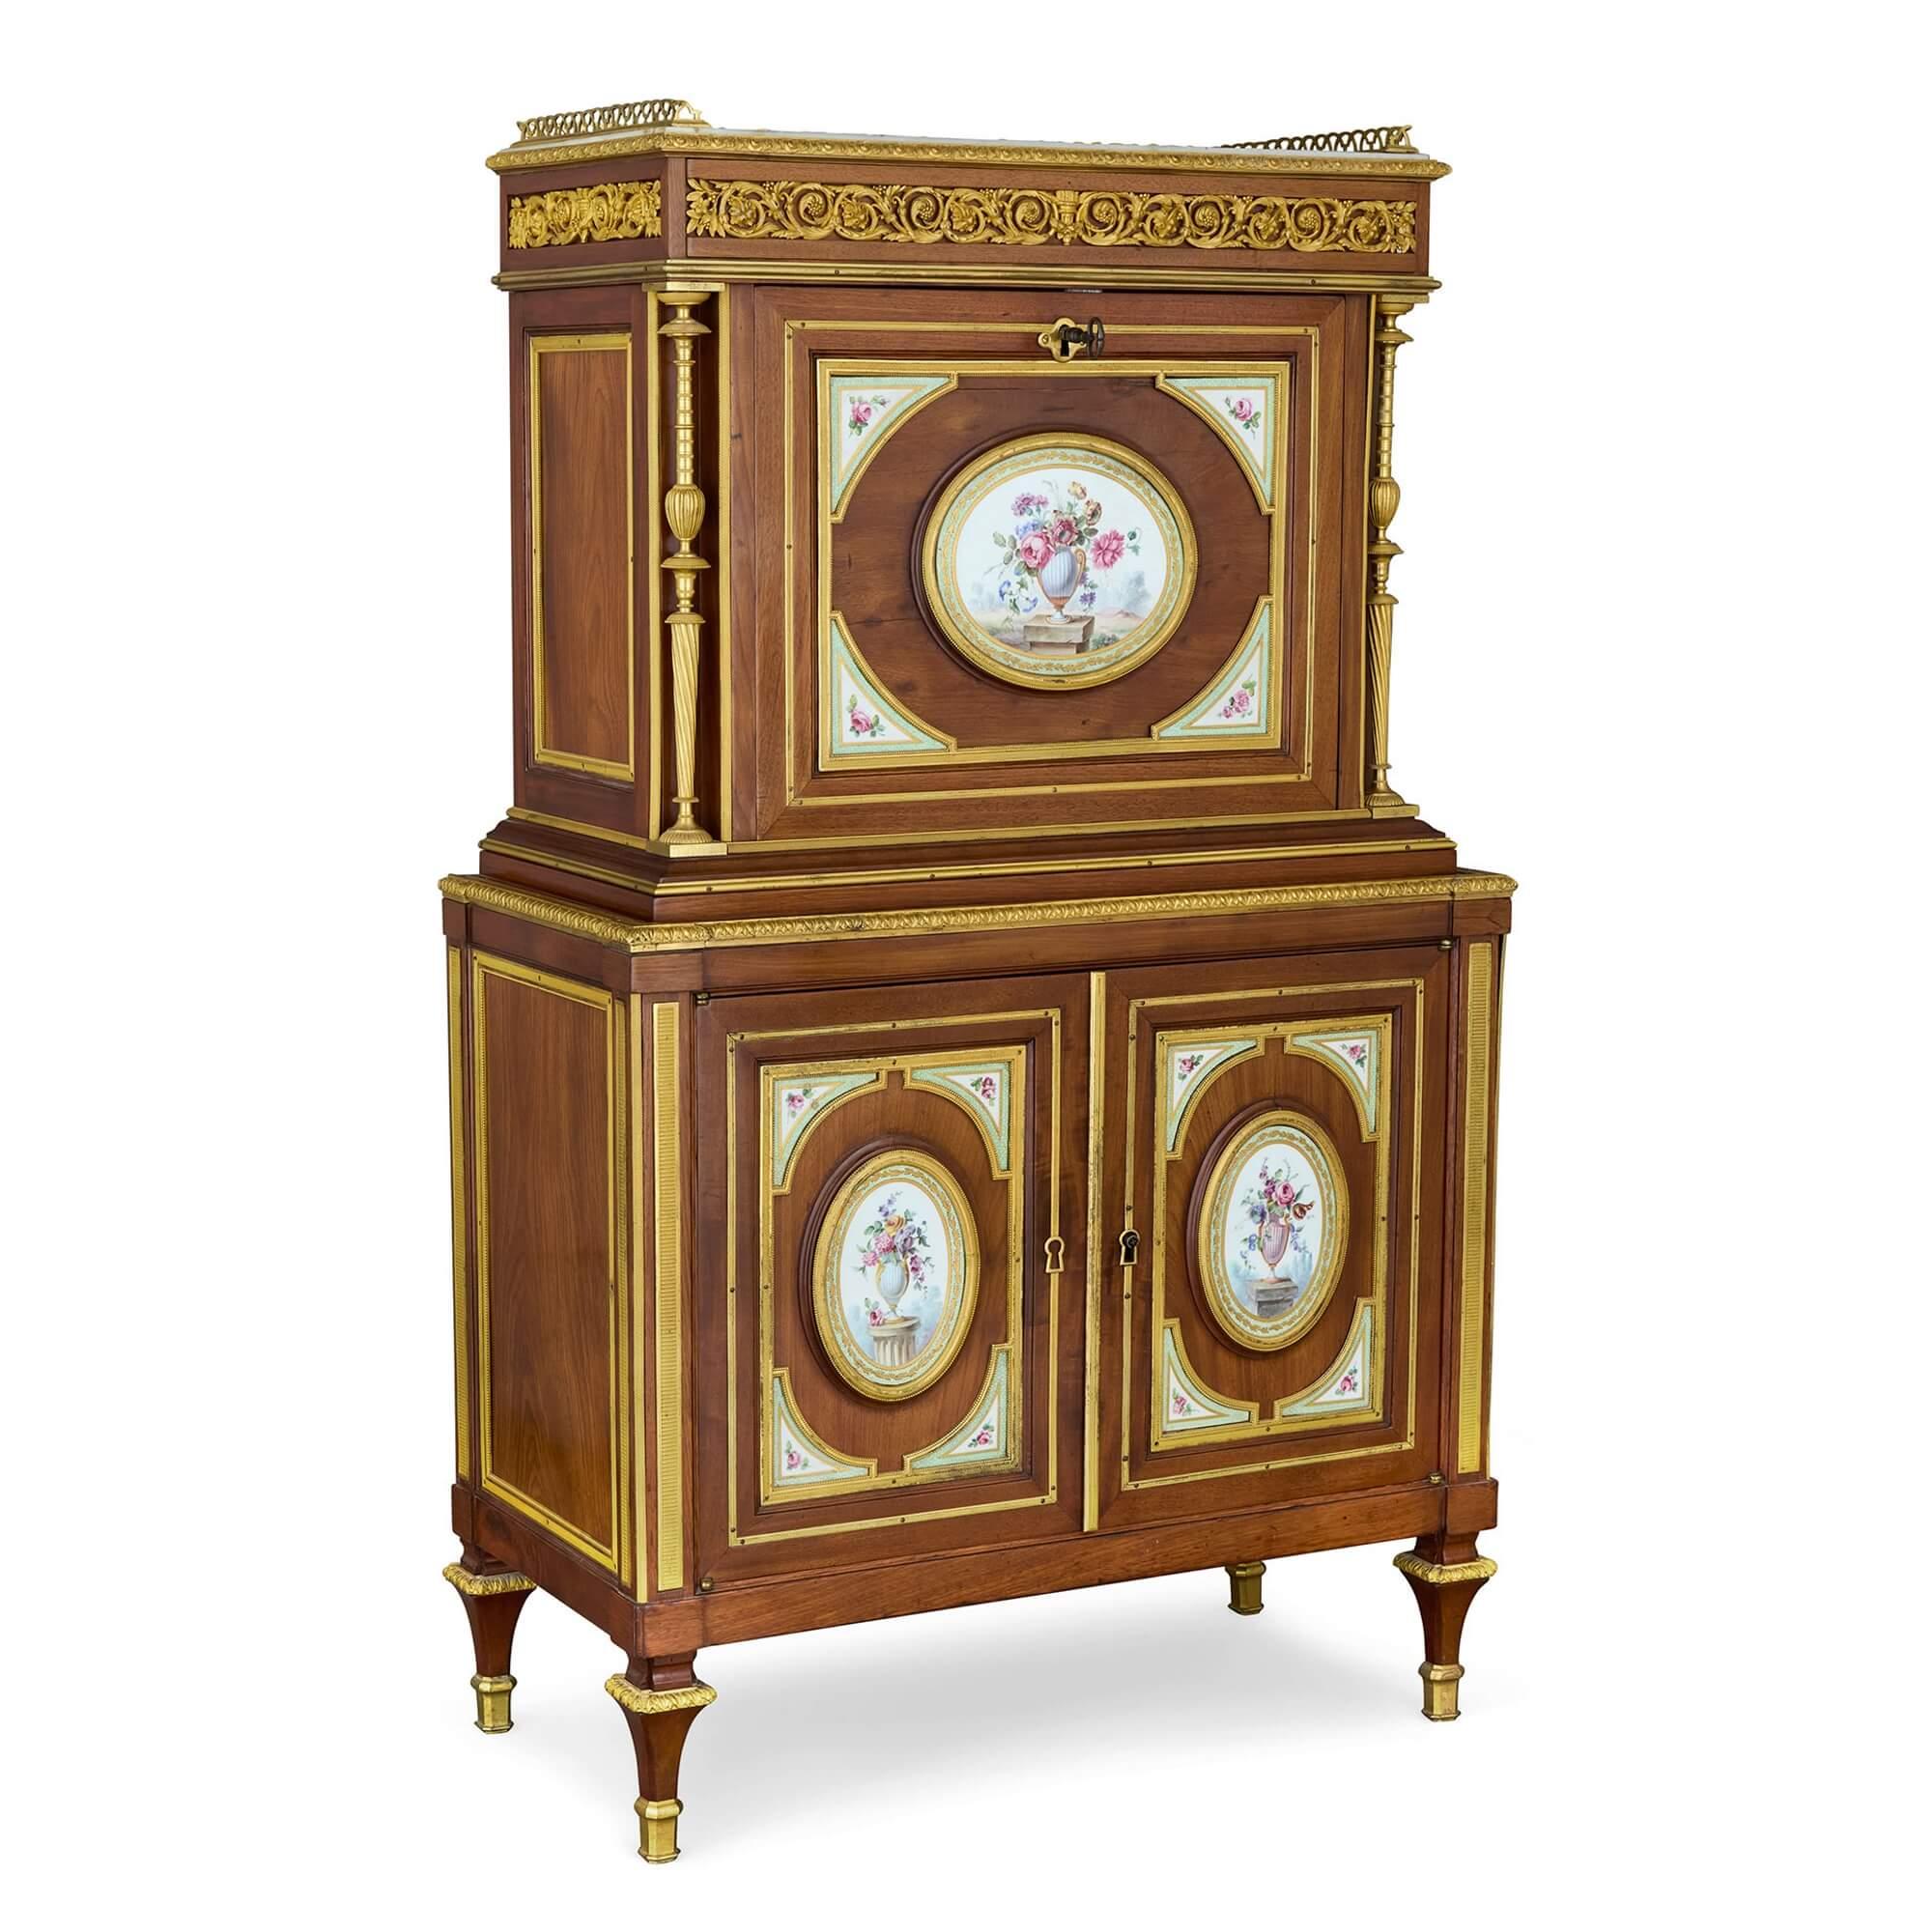 Antique Louis XVI style ormolu and Sèvres porcelain mounted secretaire
French, c. 1840
Height 127cm, width 76cm, depth 37cm

This magnificent secretaire was crafted around 1840 from a selection of high quality including 18th century Sèvres porcelain